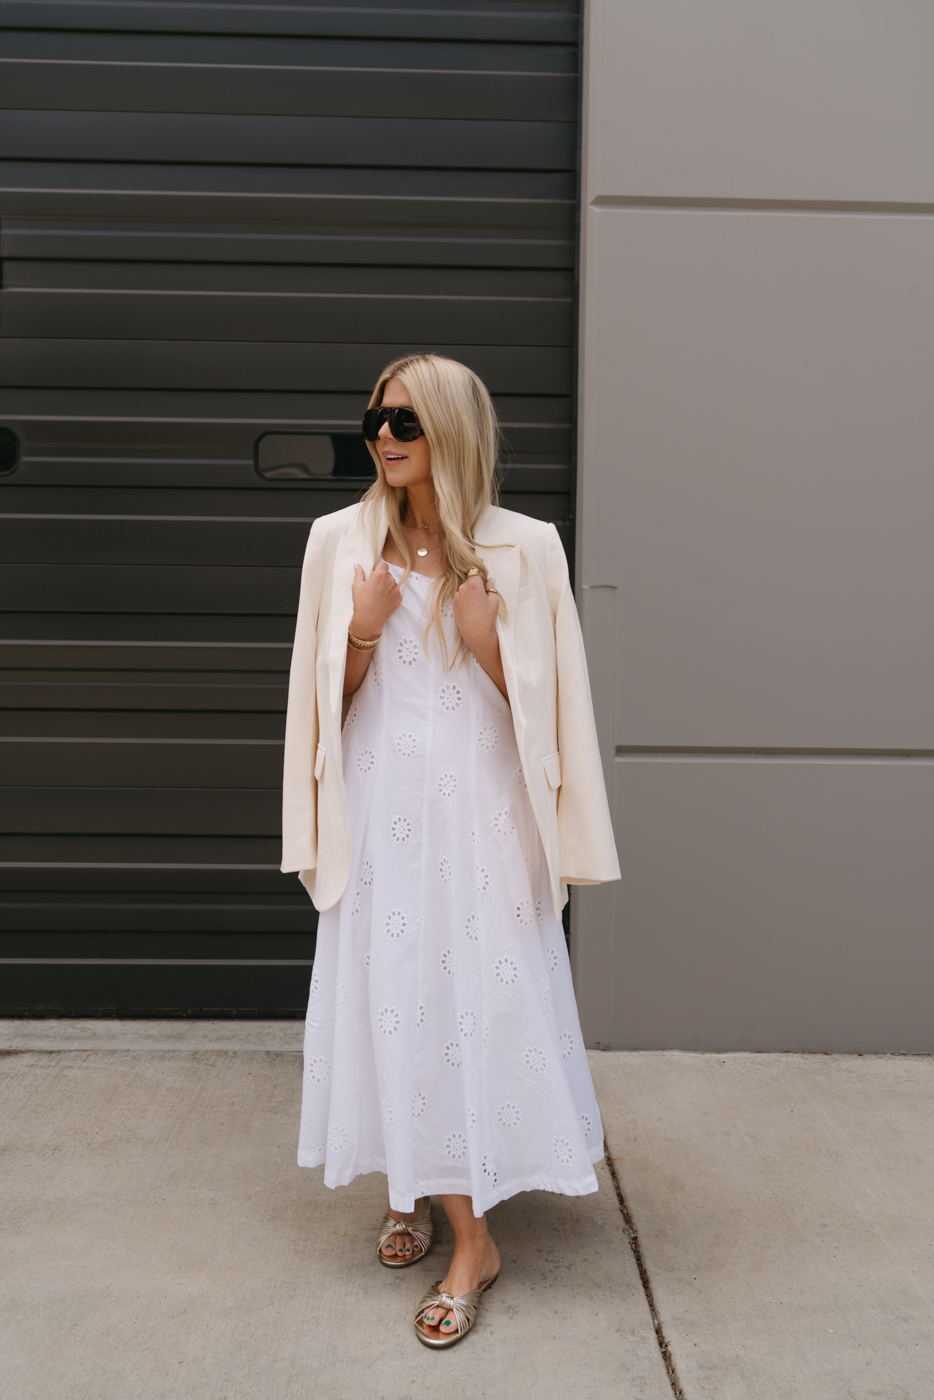 Summer Style With Walmart by Salty Lashes Blogger Lisa Allen: wearing white eyelet dress and blazer